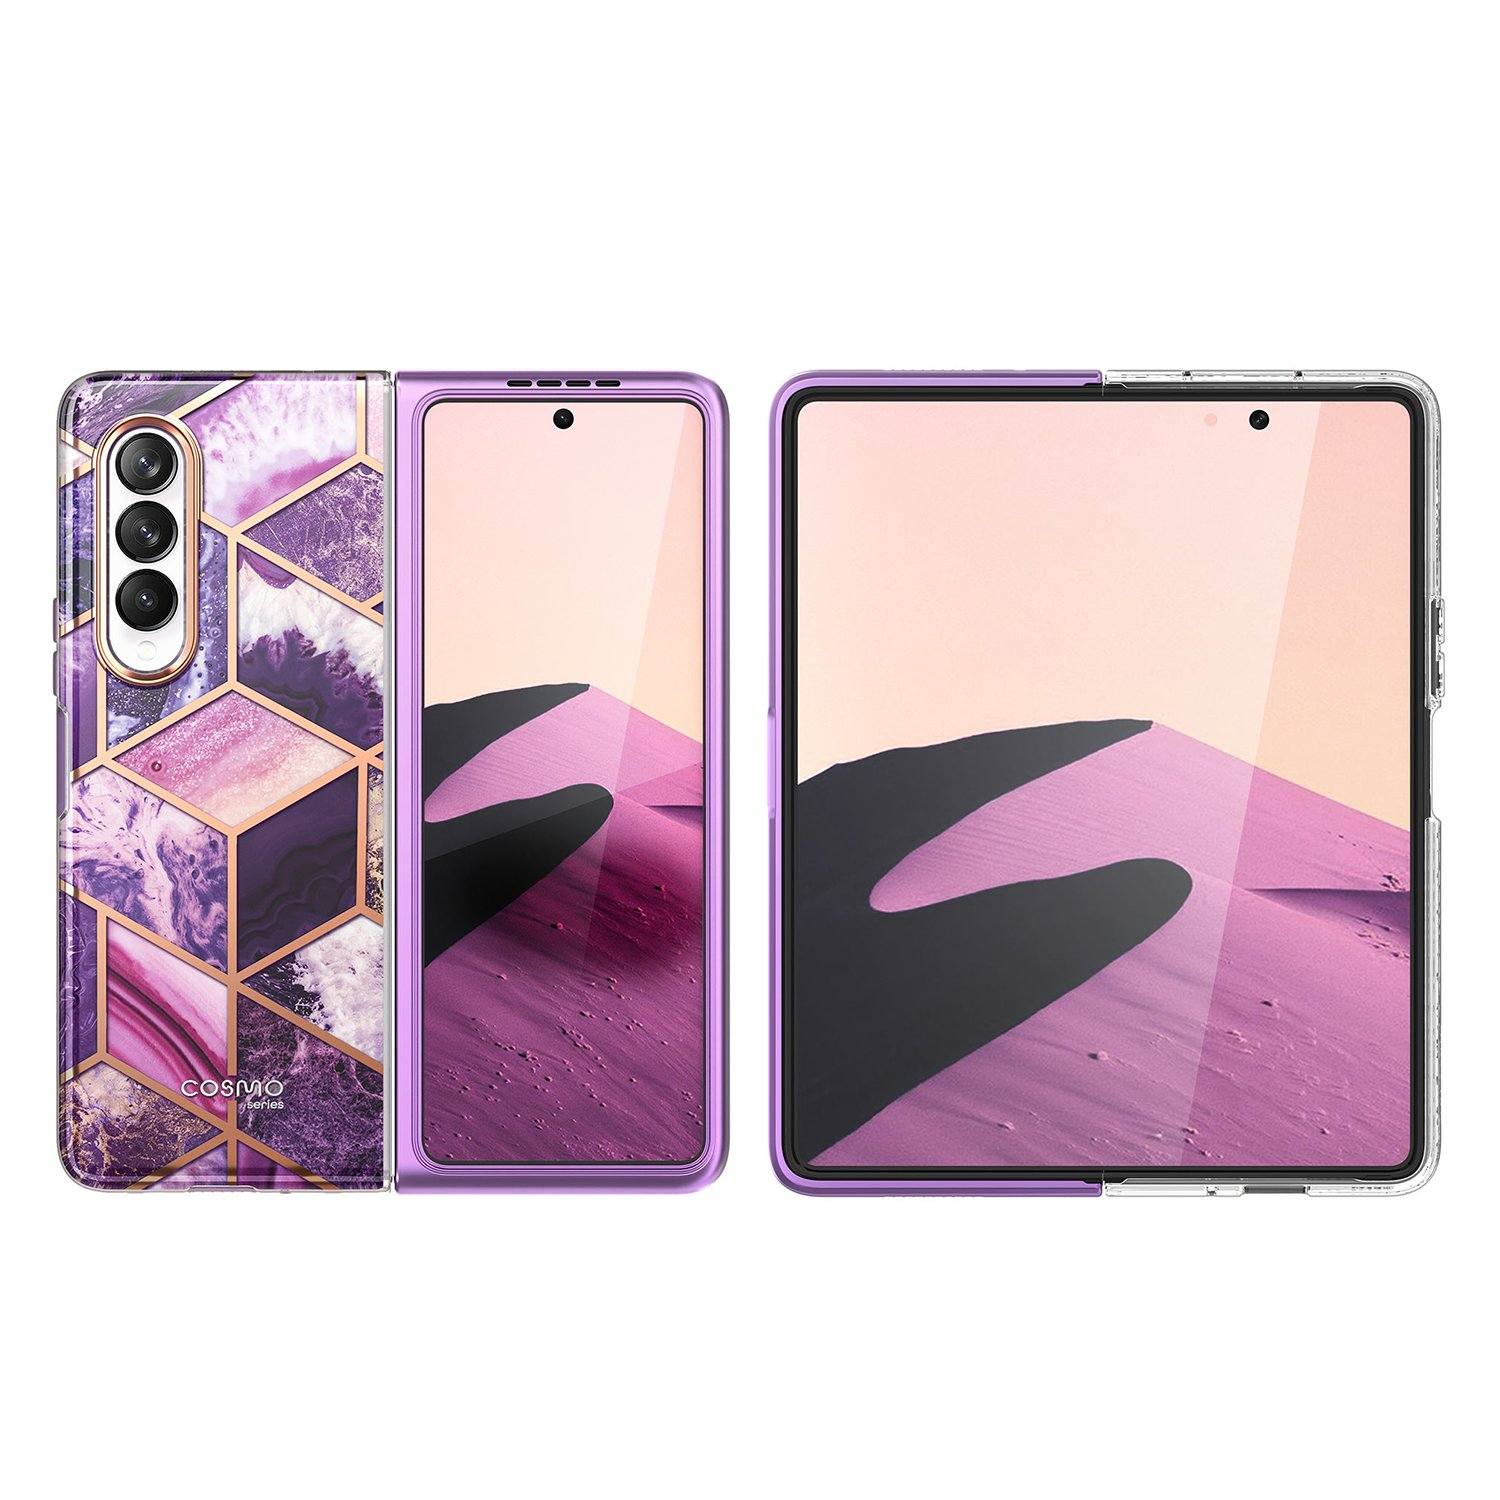 i-Blason Cosmo Series Slim Stylish Protective Bumper Case for Samsung Galaxy Z Fold3 5G (2021)(Without Screen Protector) Default i-Blason 